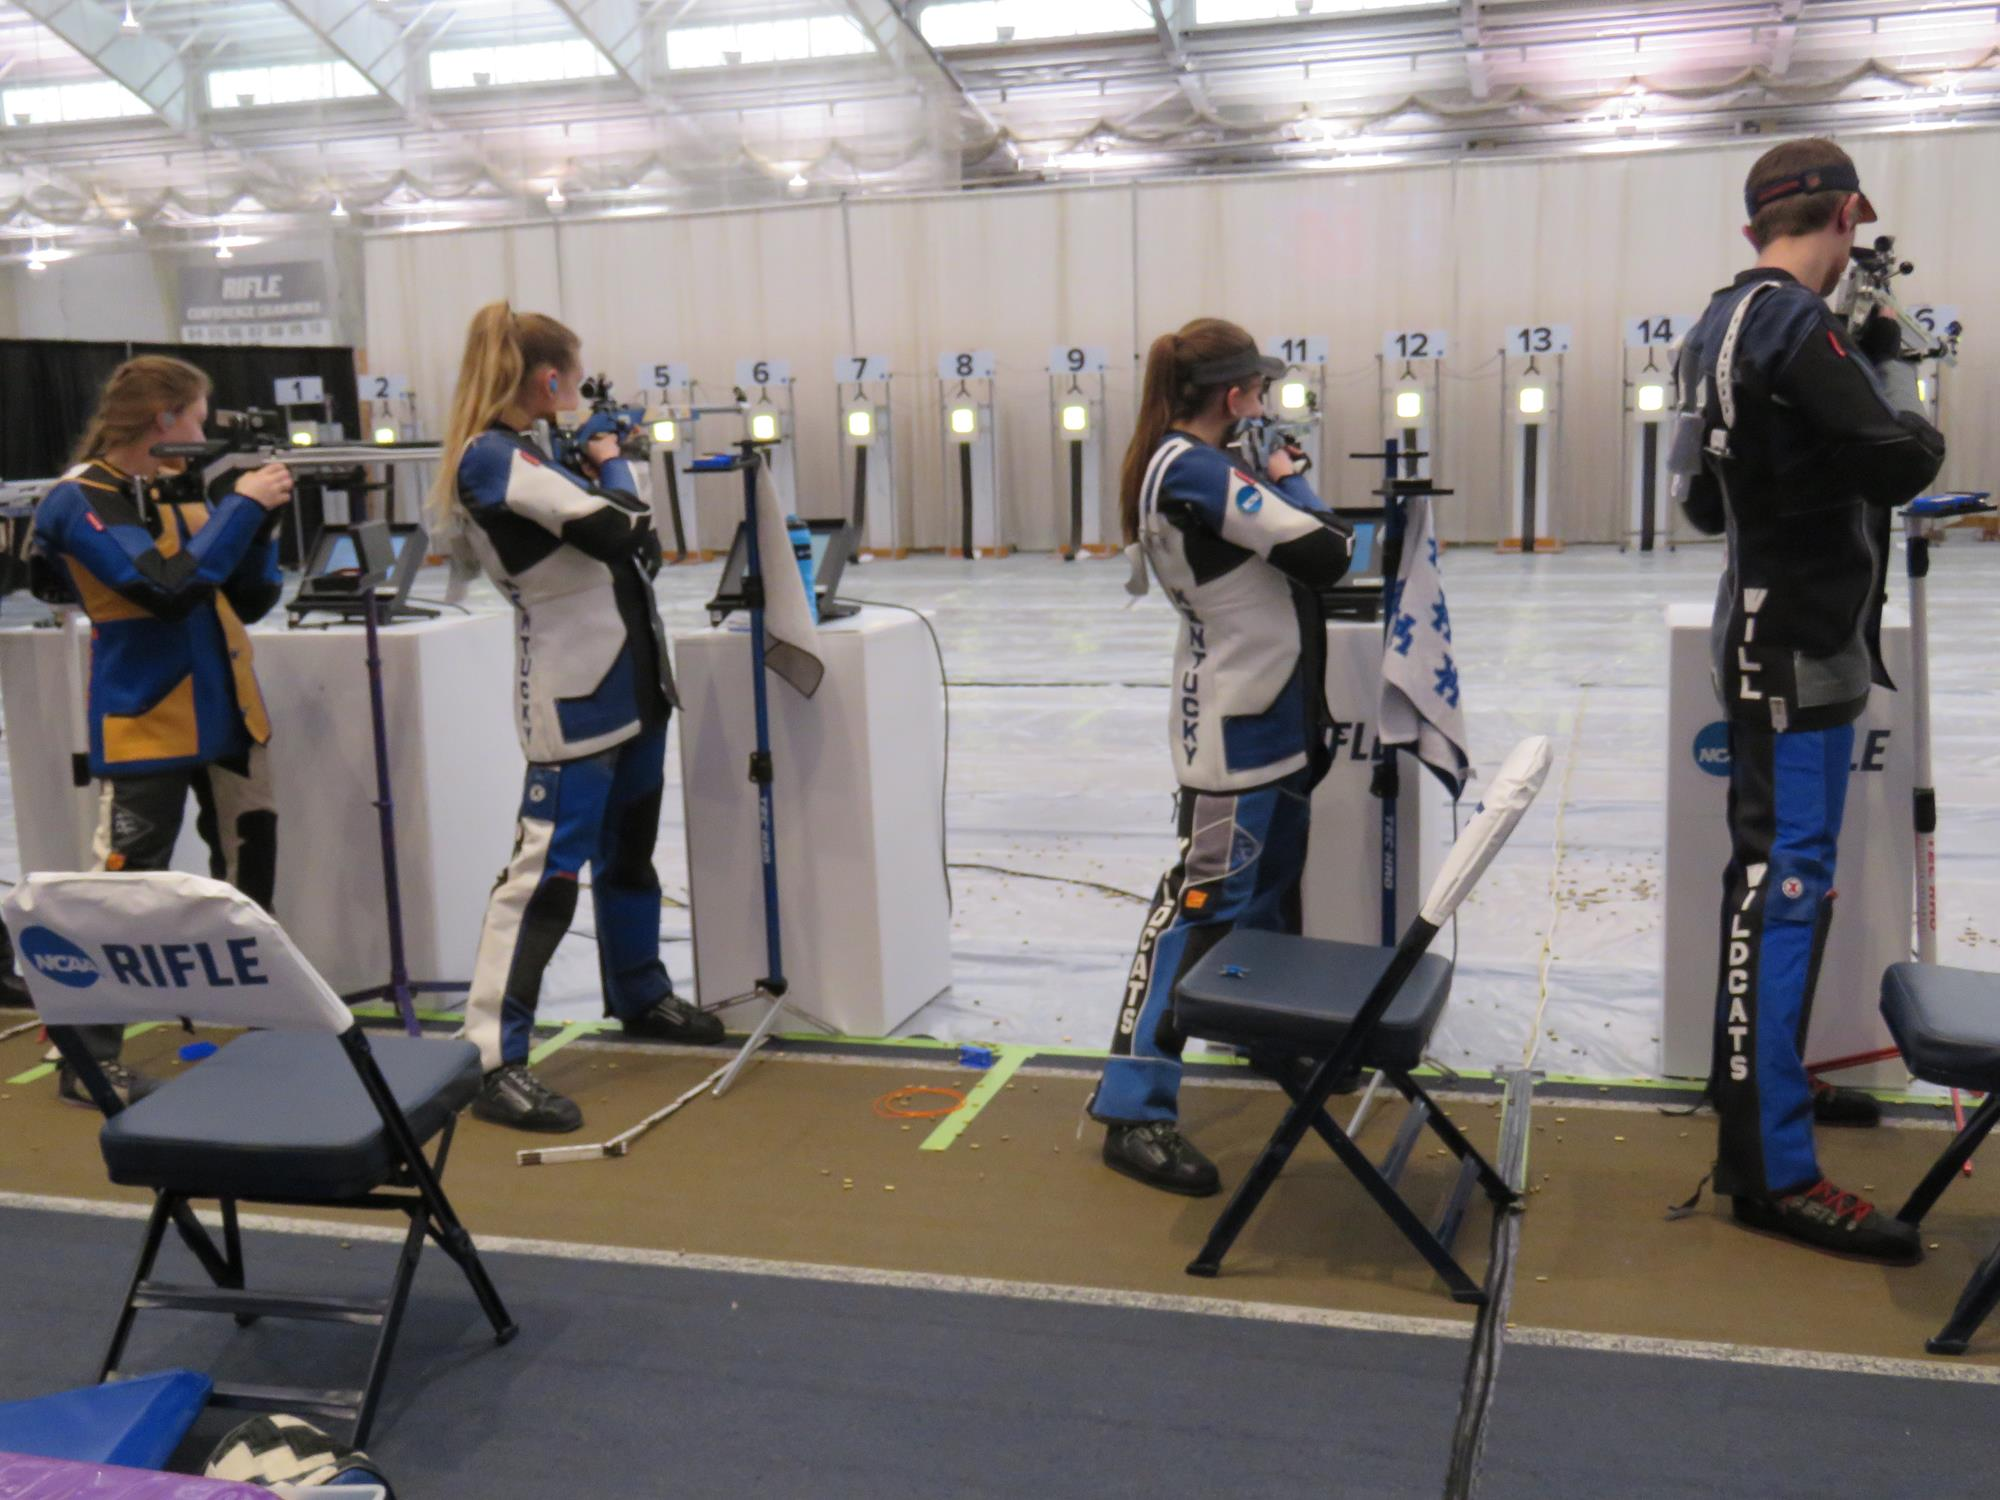 UK Rifle in Third at GARC after Day One Smallbore